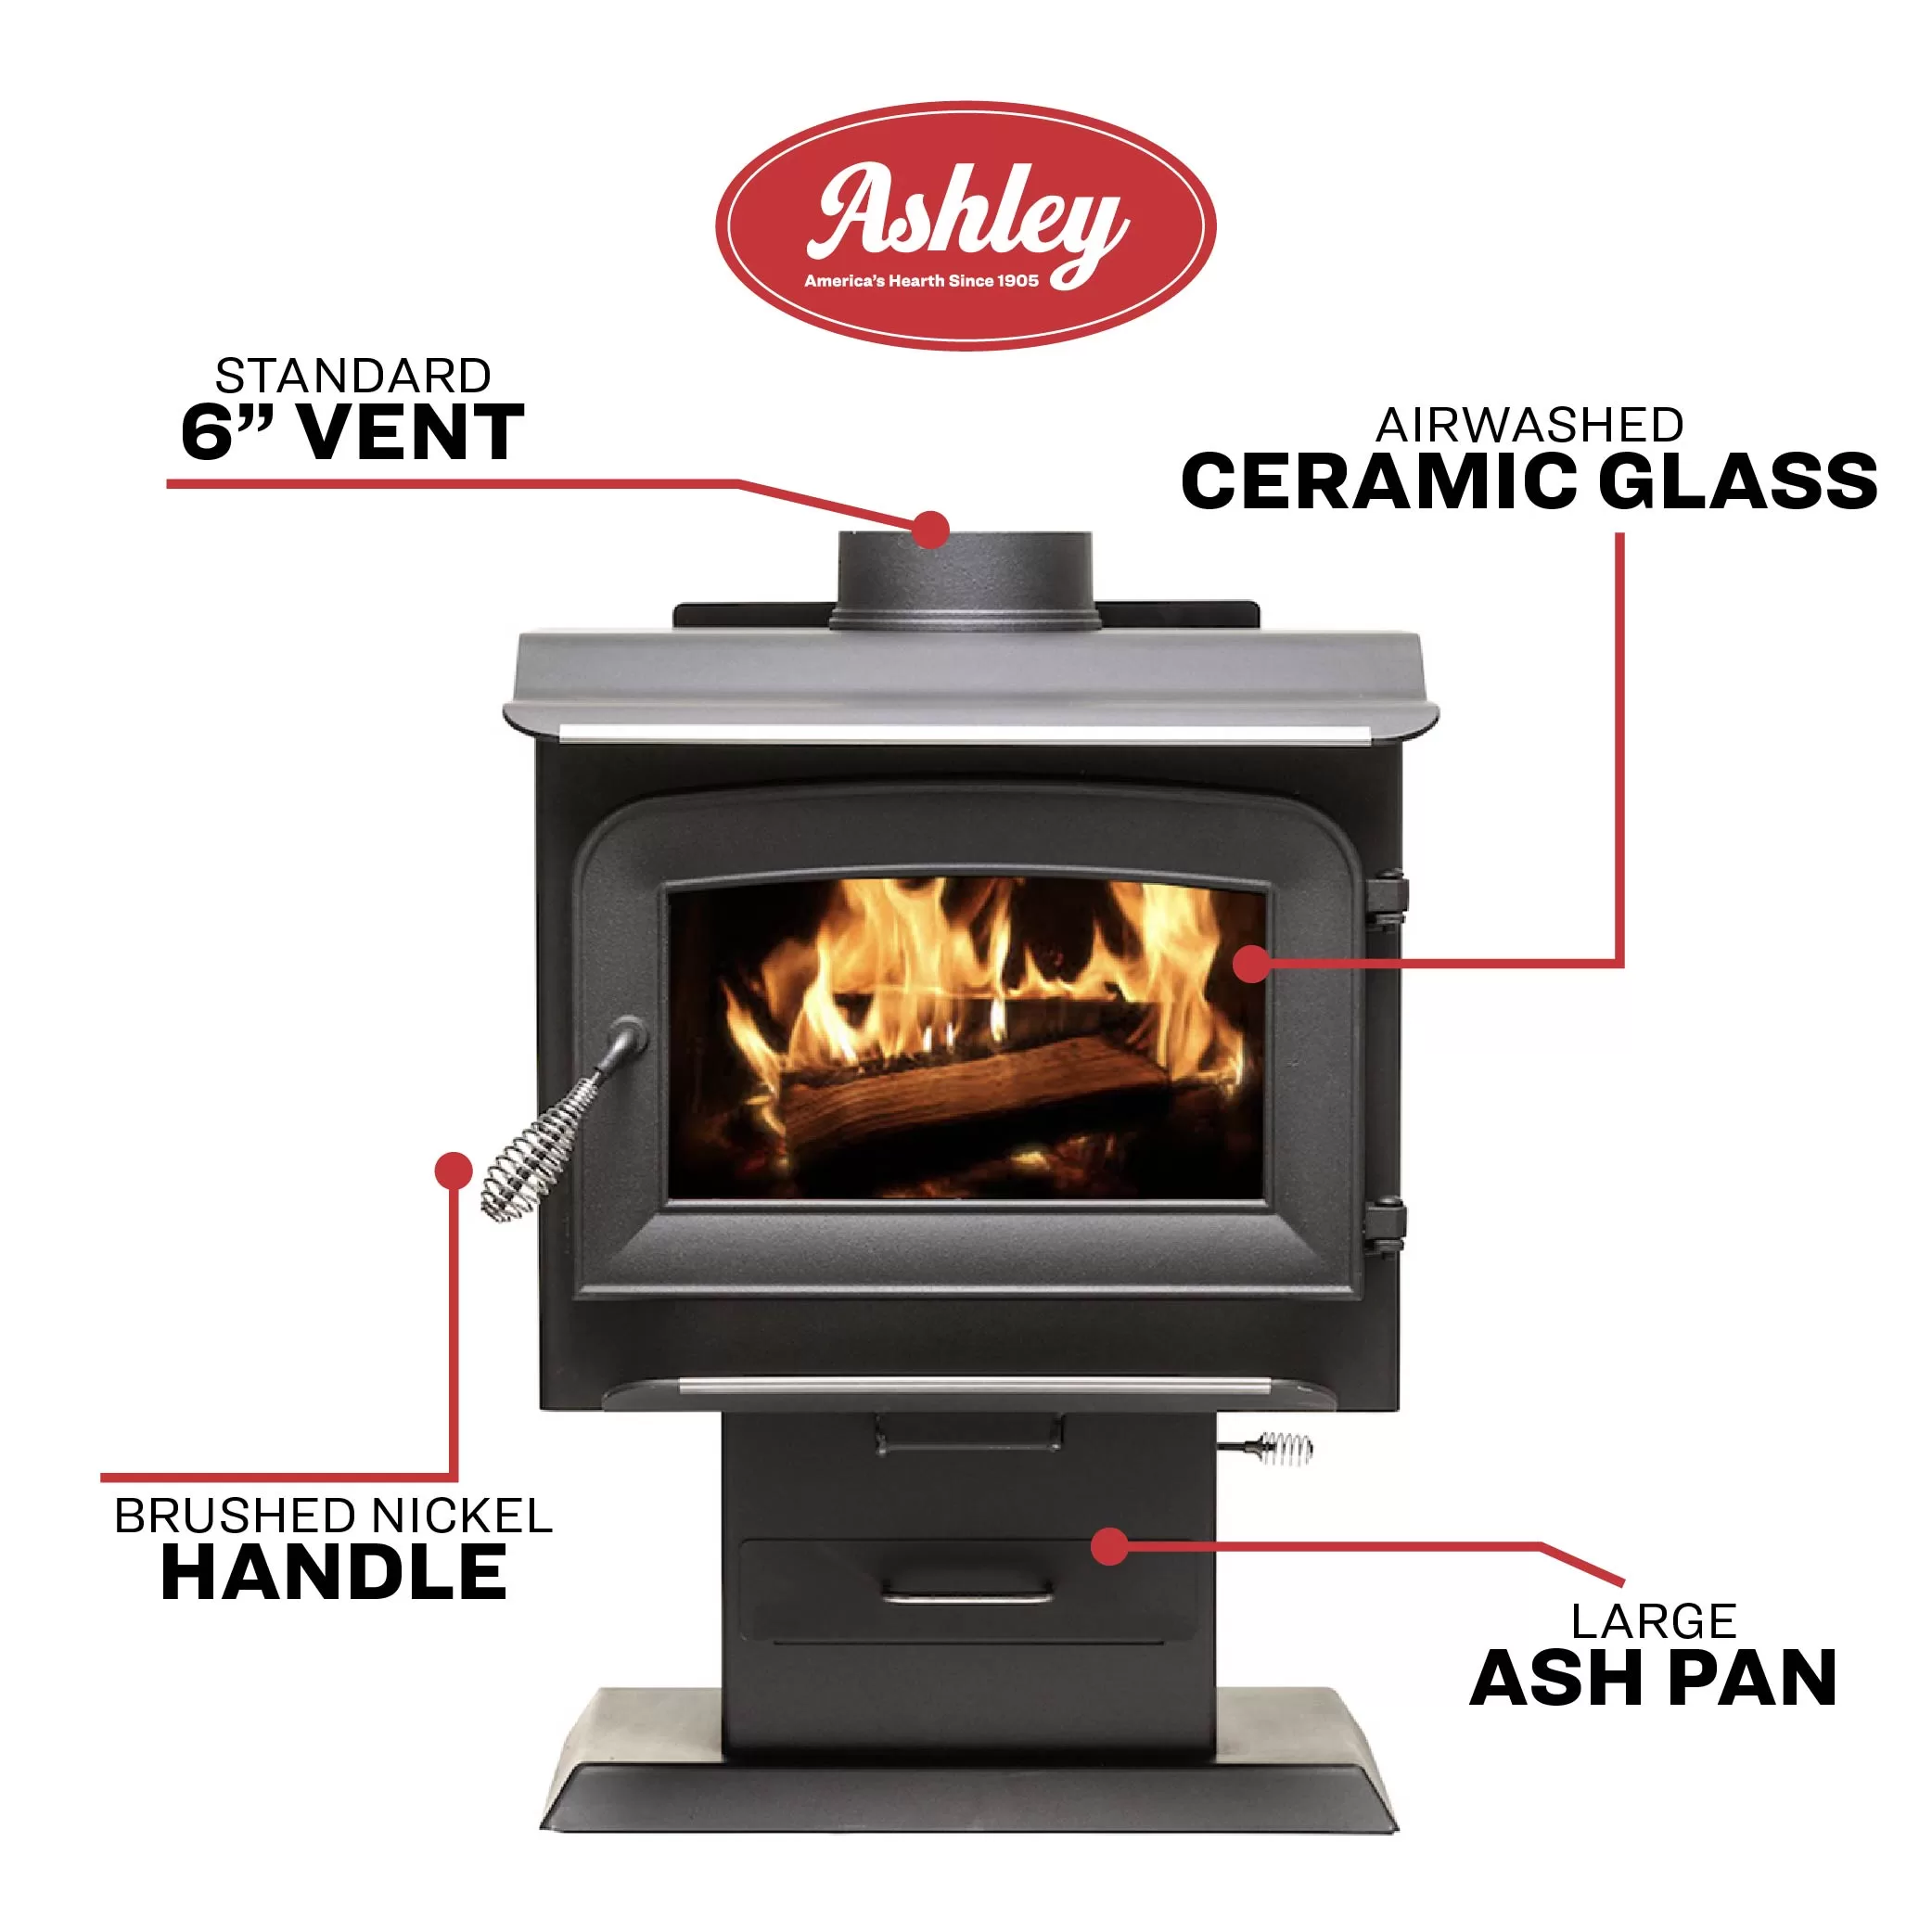 https://www.usstove.com/wp-content/uploads/2020/01/Wood-Stove_Ashley_AW1120E-p_Features-jpg.webp